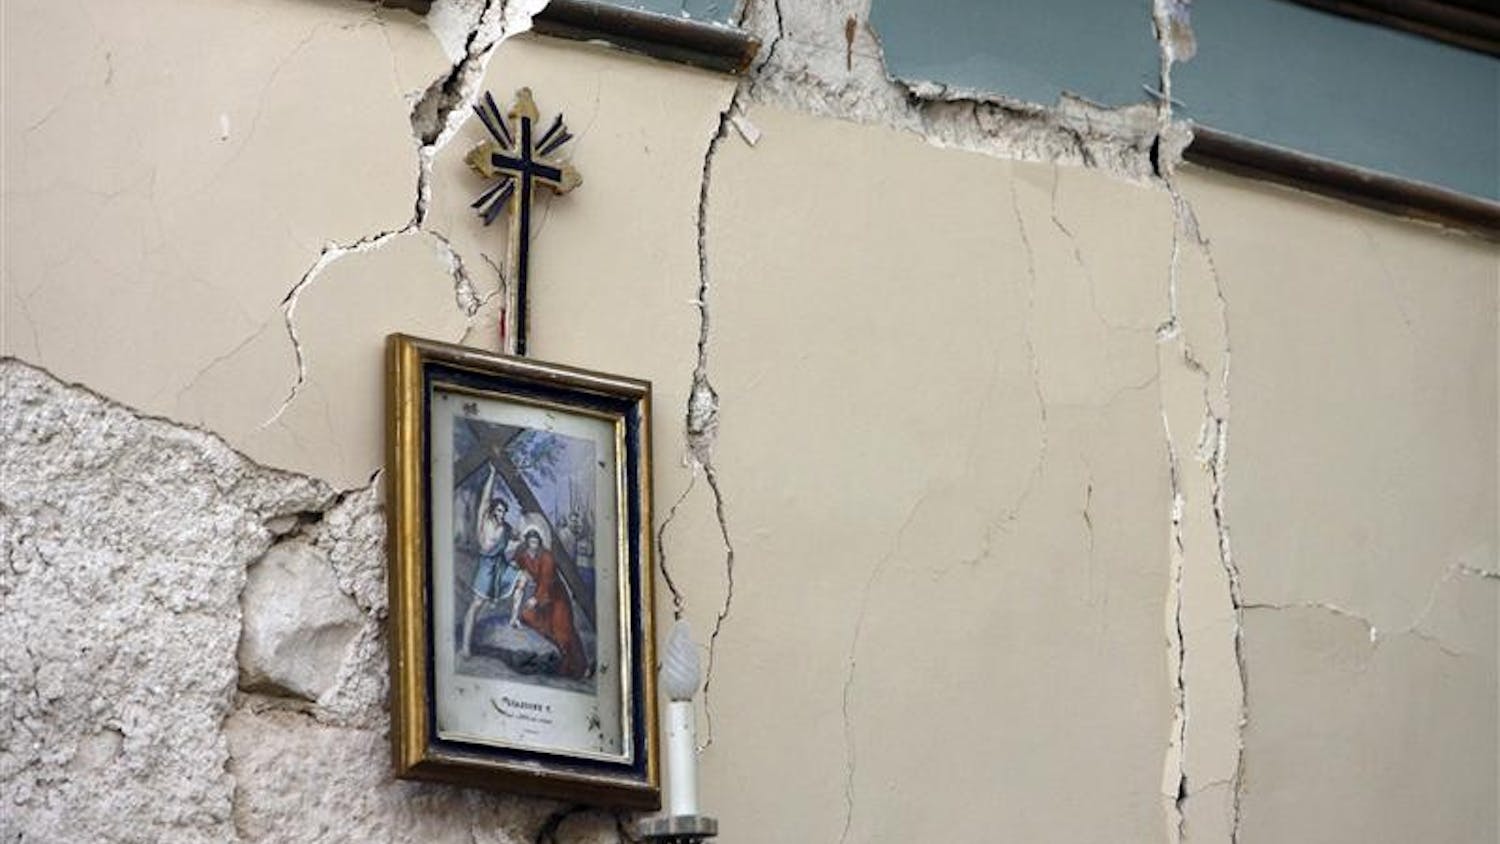 Cracks are seen in the wall of a house Monday in the village of Castelnuovo, central Italy, following a strong earthquake. A powerful earthquake in mountainous central Italy knocked down whole blocks of buildings early Monday as residents slept, killing more than 90 people in the country's deadliest quake in nearly three decades, officials said. Tens of thousands were homeless and 1,500 were injured.